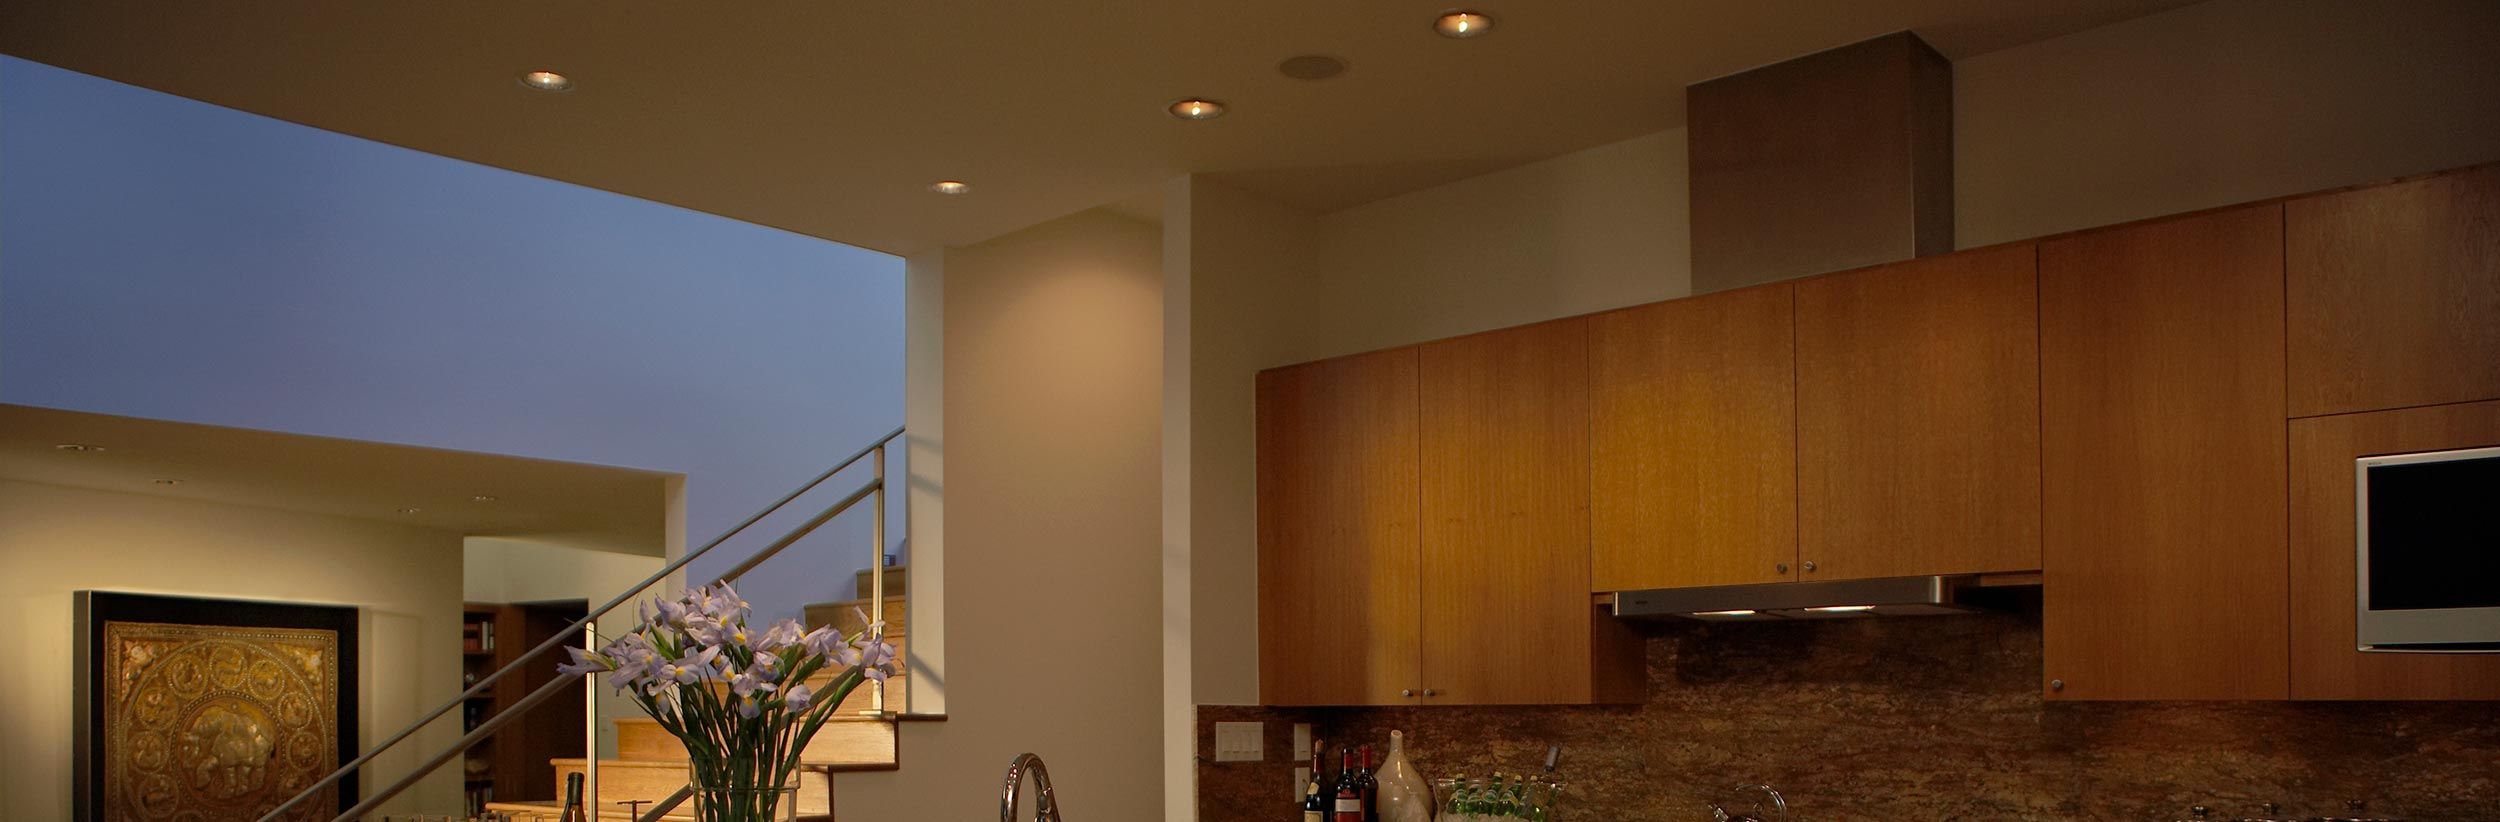 Kitchen with led lamps